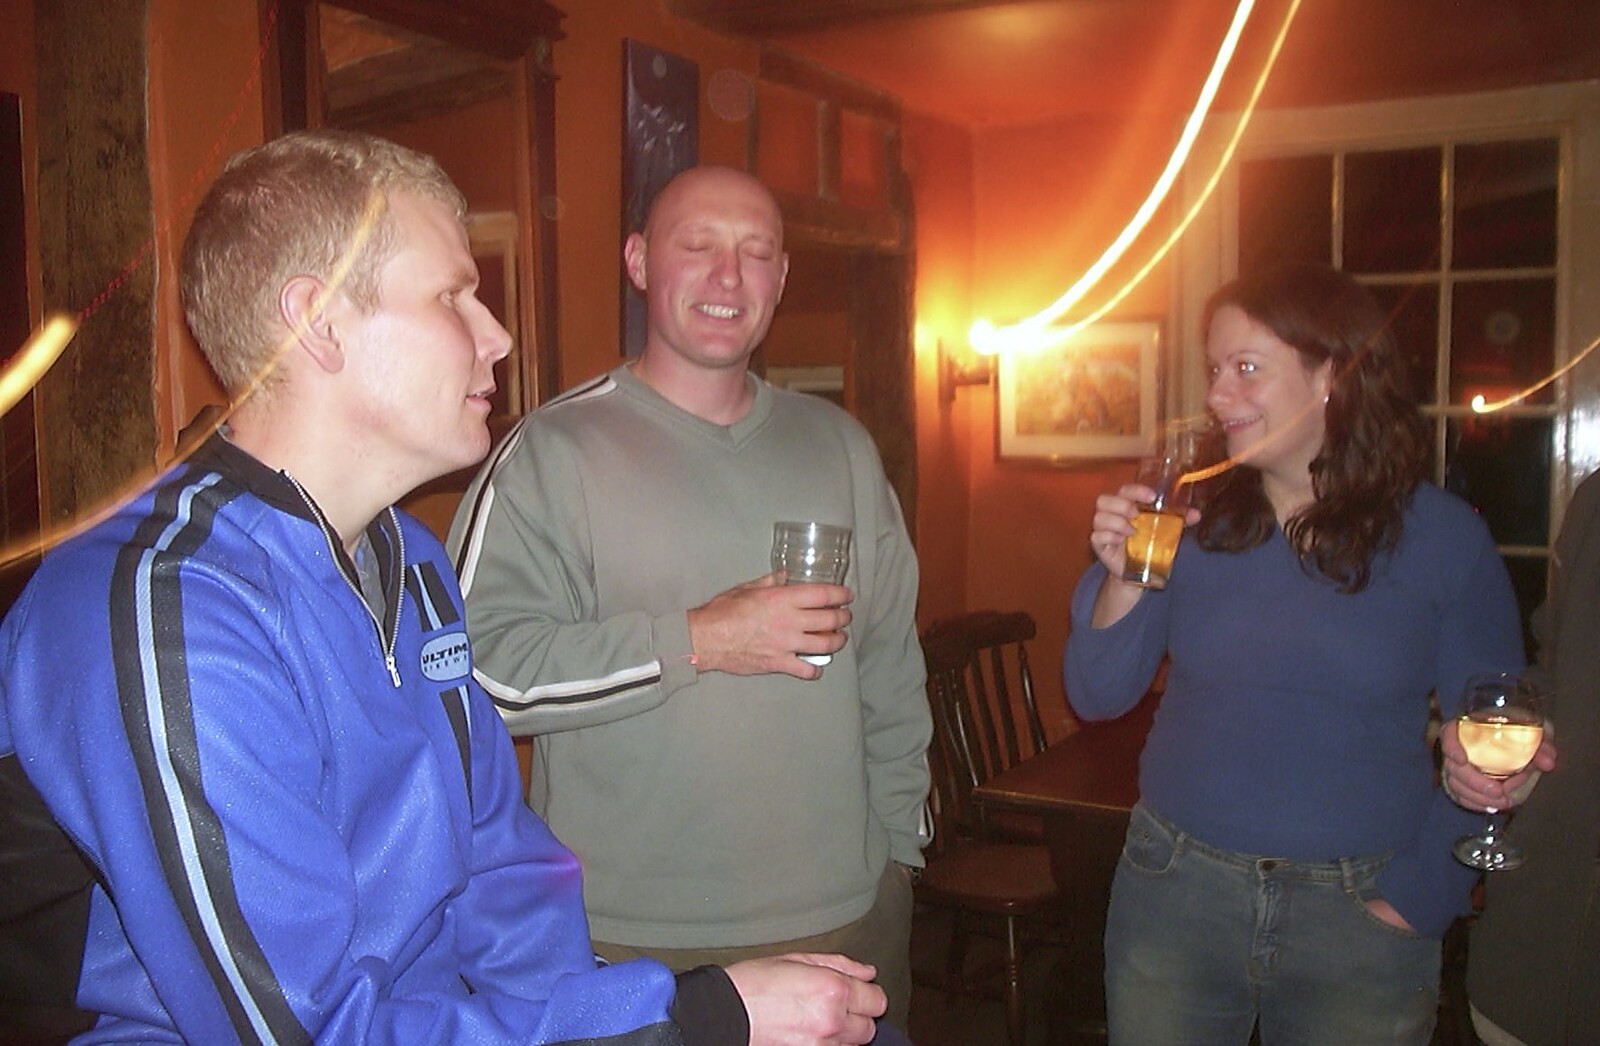 Mark Joseph at Revs, and the BSCC at Hoxne and Wortham - 30th September 2004: Bill, Gov and Clare